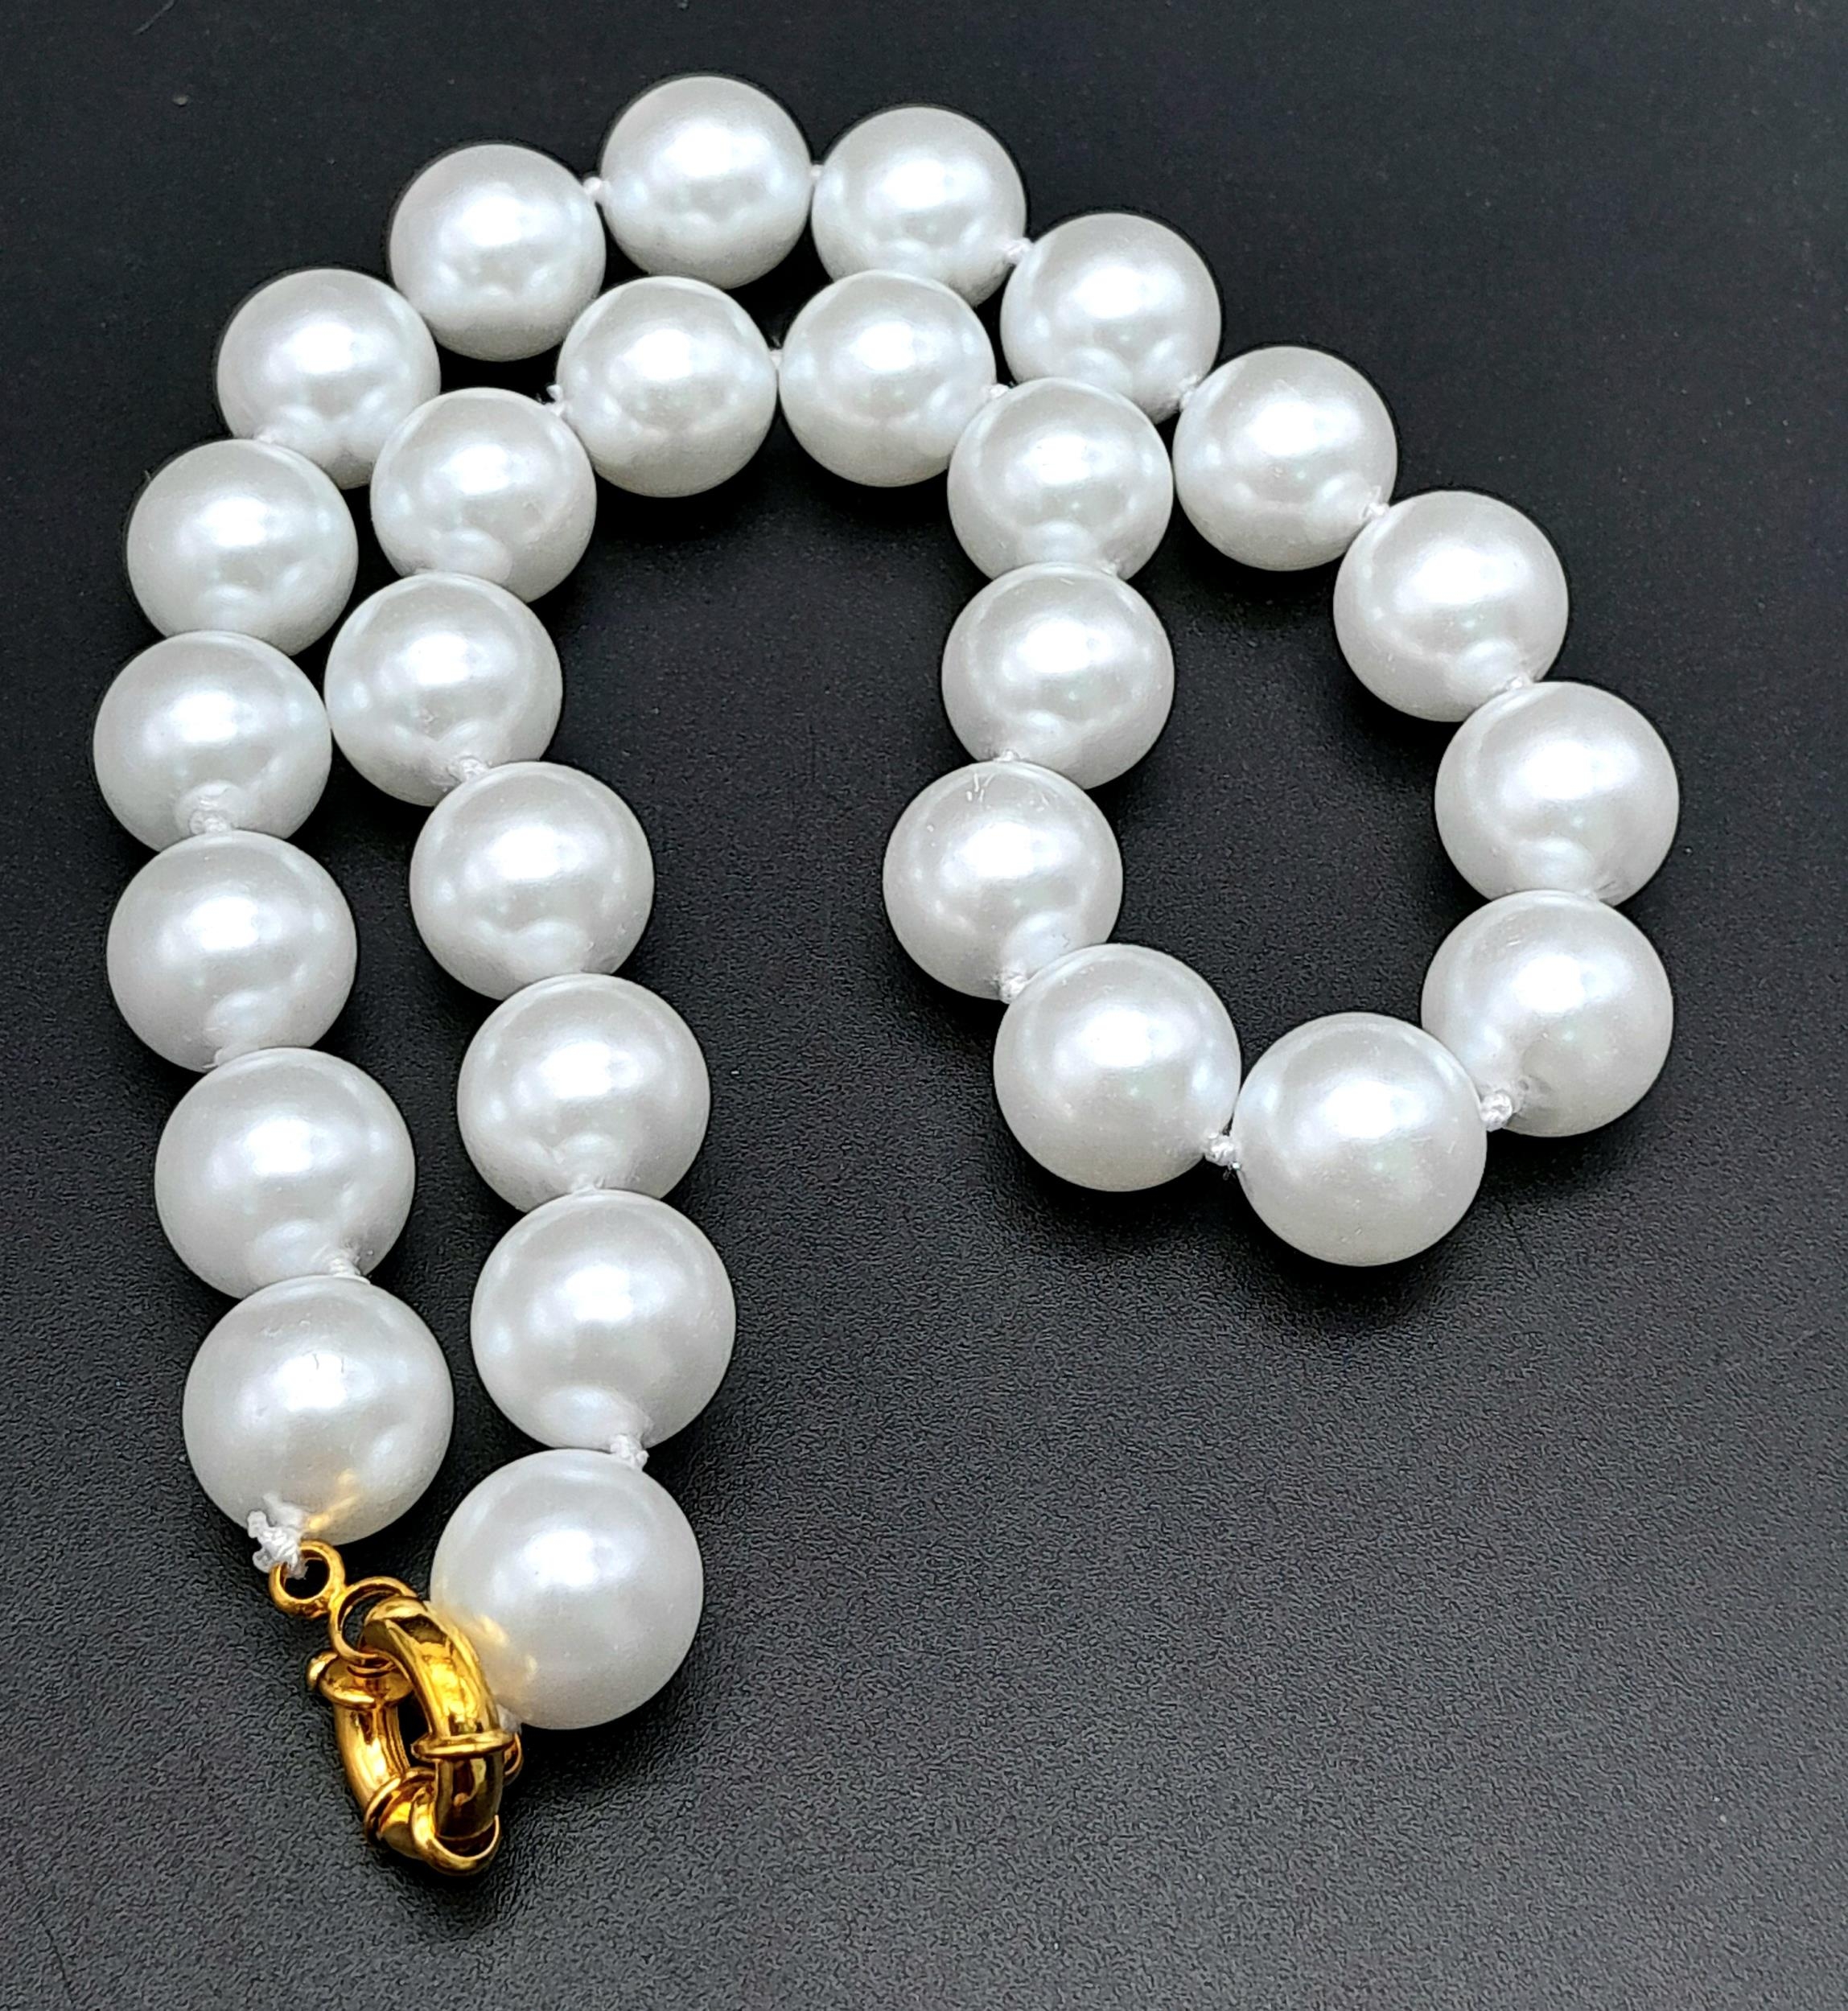 A Bright White South Sea Pearl Shell Bead Necklace. 14mm beads. 40cm. Gilded clasp. - Image 3 of 4